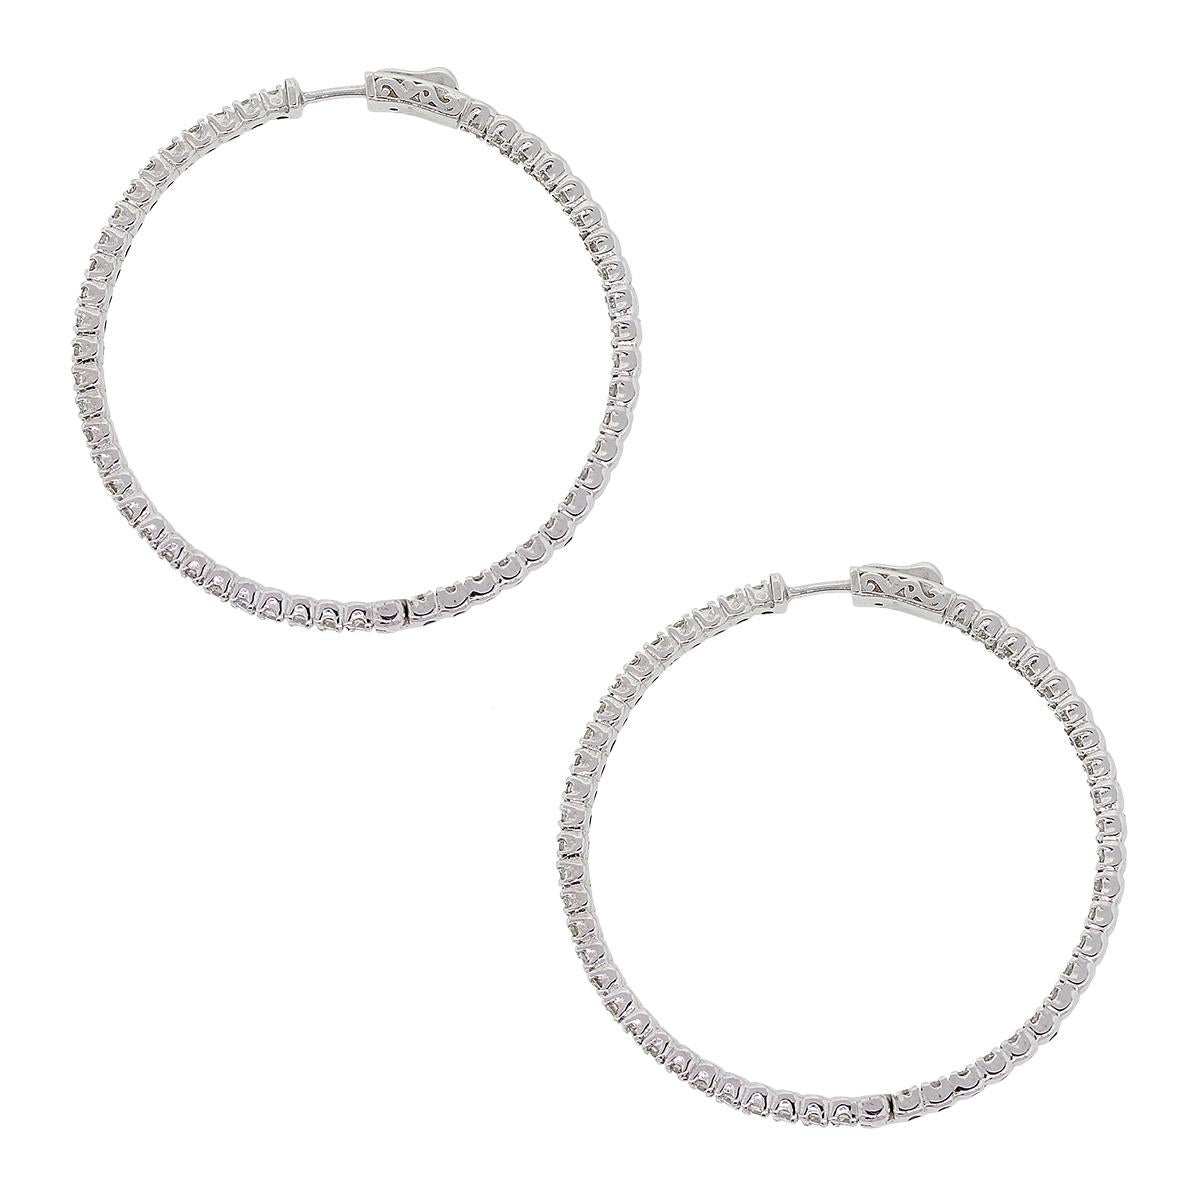 Material: 14k white gold
Style: Inside out extra large hoop earrings
Diamond Details: Approximately 5ctw of round brilliant diamonds. Diamonds are G/H in color and SI in clarity.
Earring Measurements: 2″ x 0.13″ x 2″
Total Weight: 19.3g